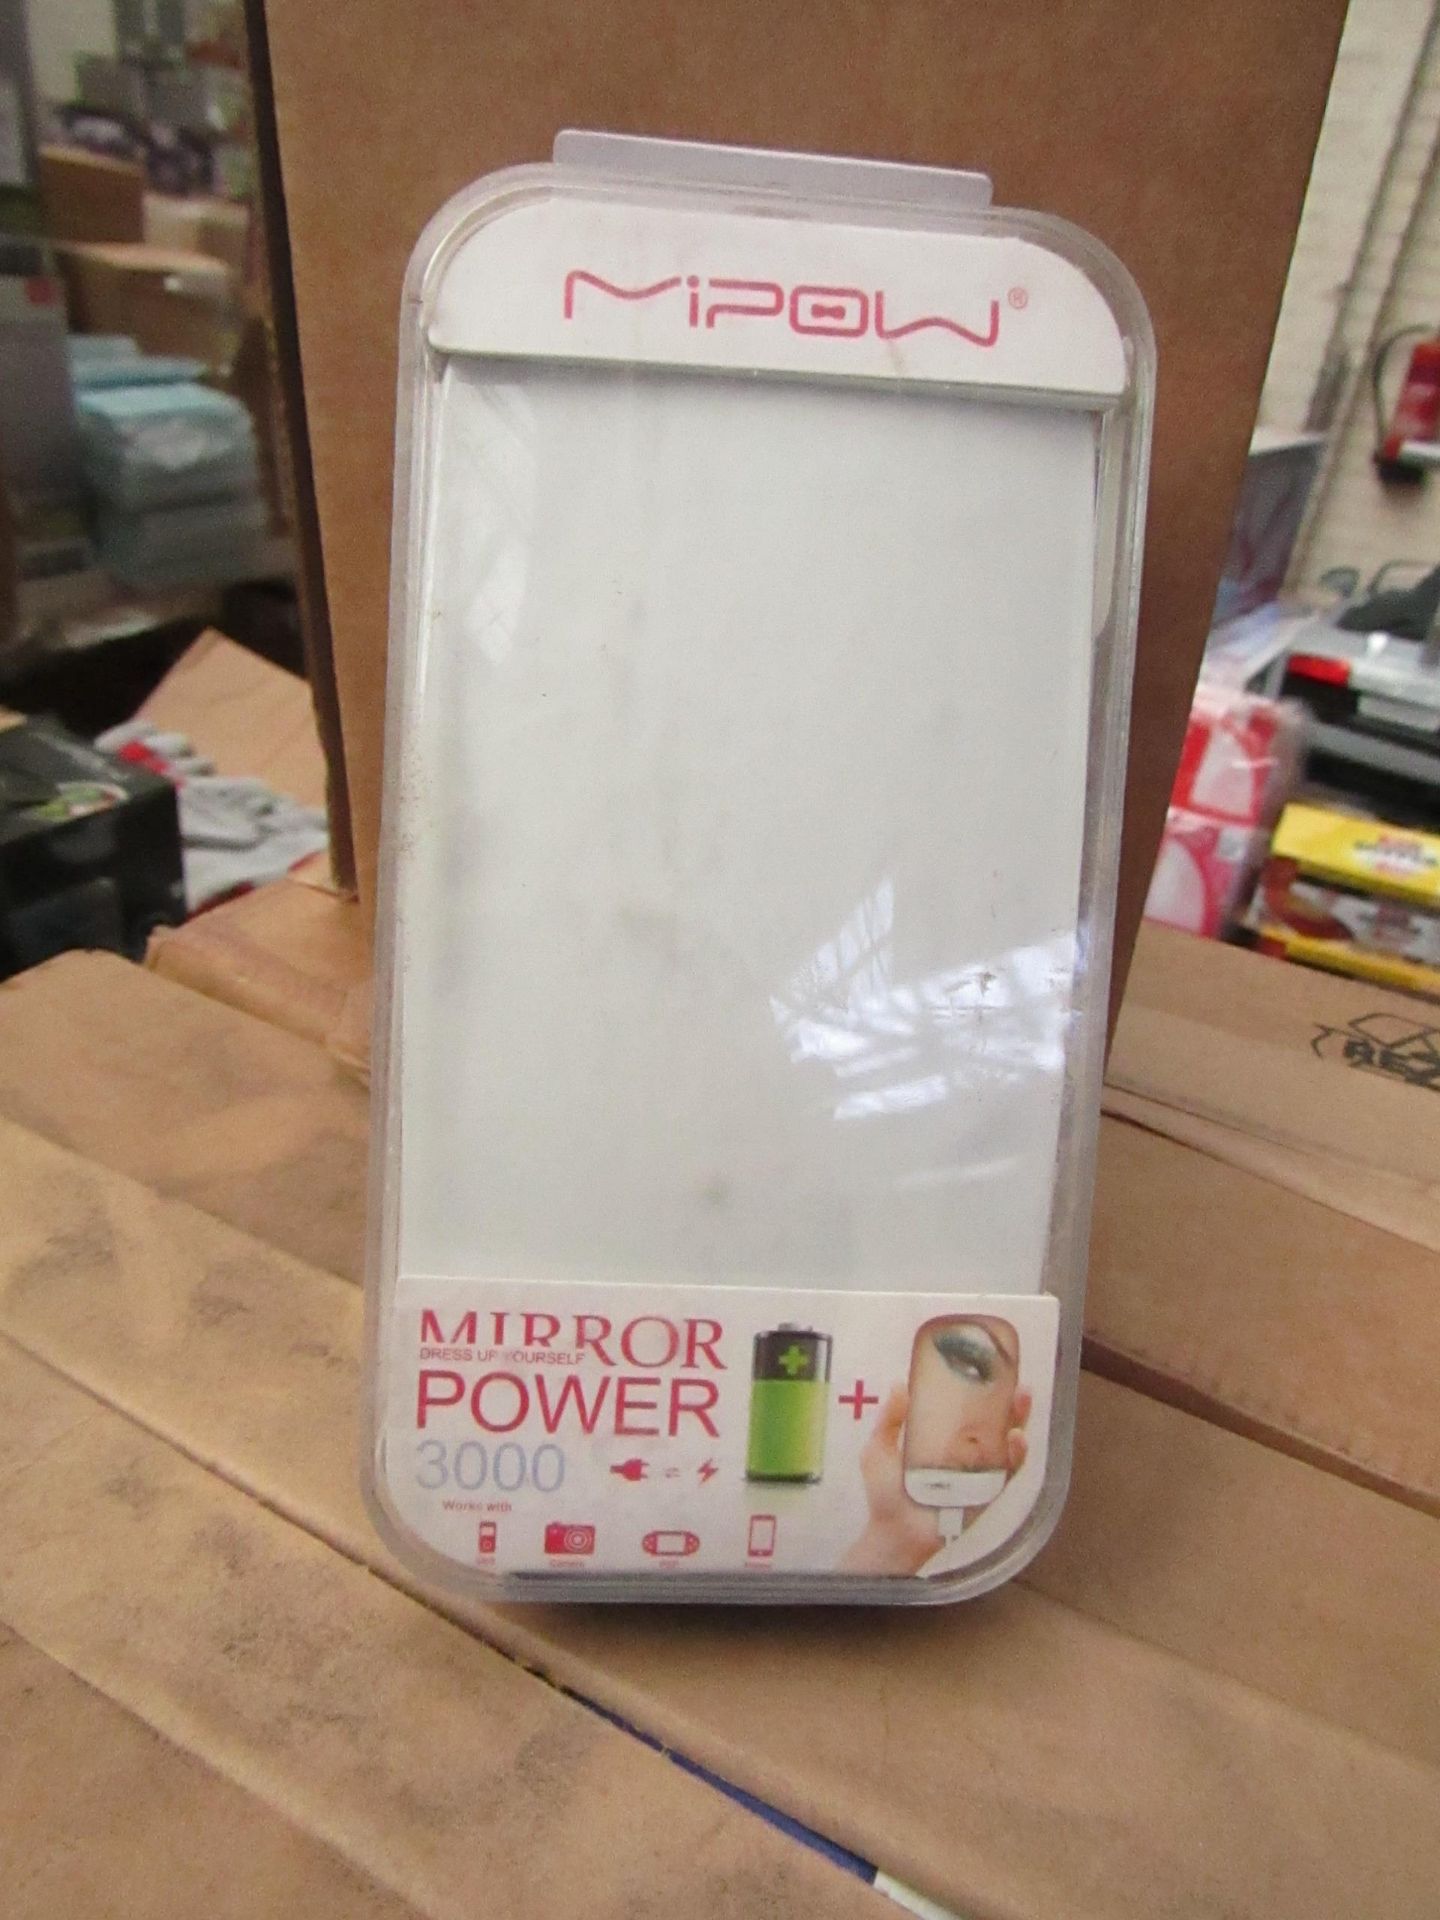 Mirror Power 3000 External Battery & Mirror. Boxed but untested